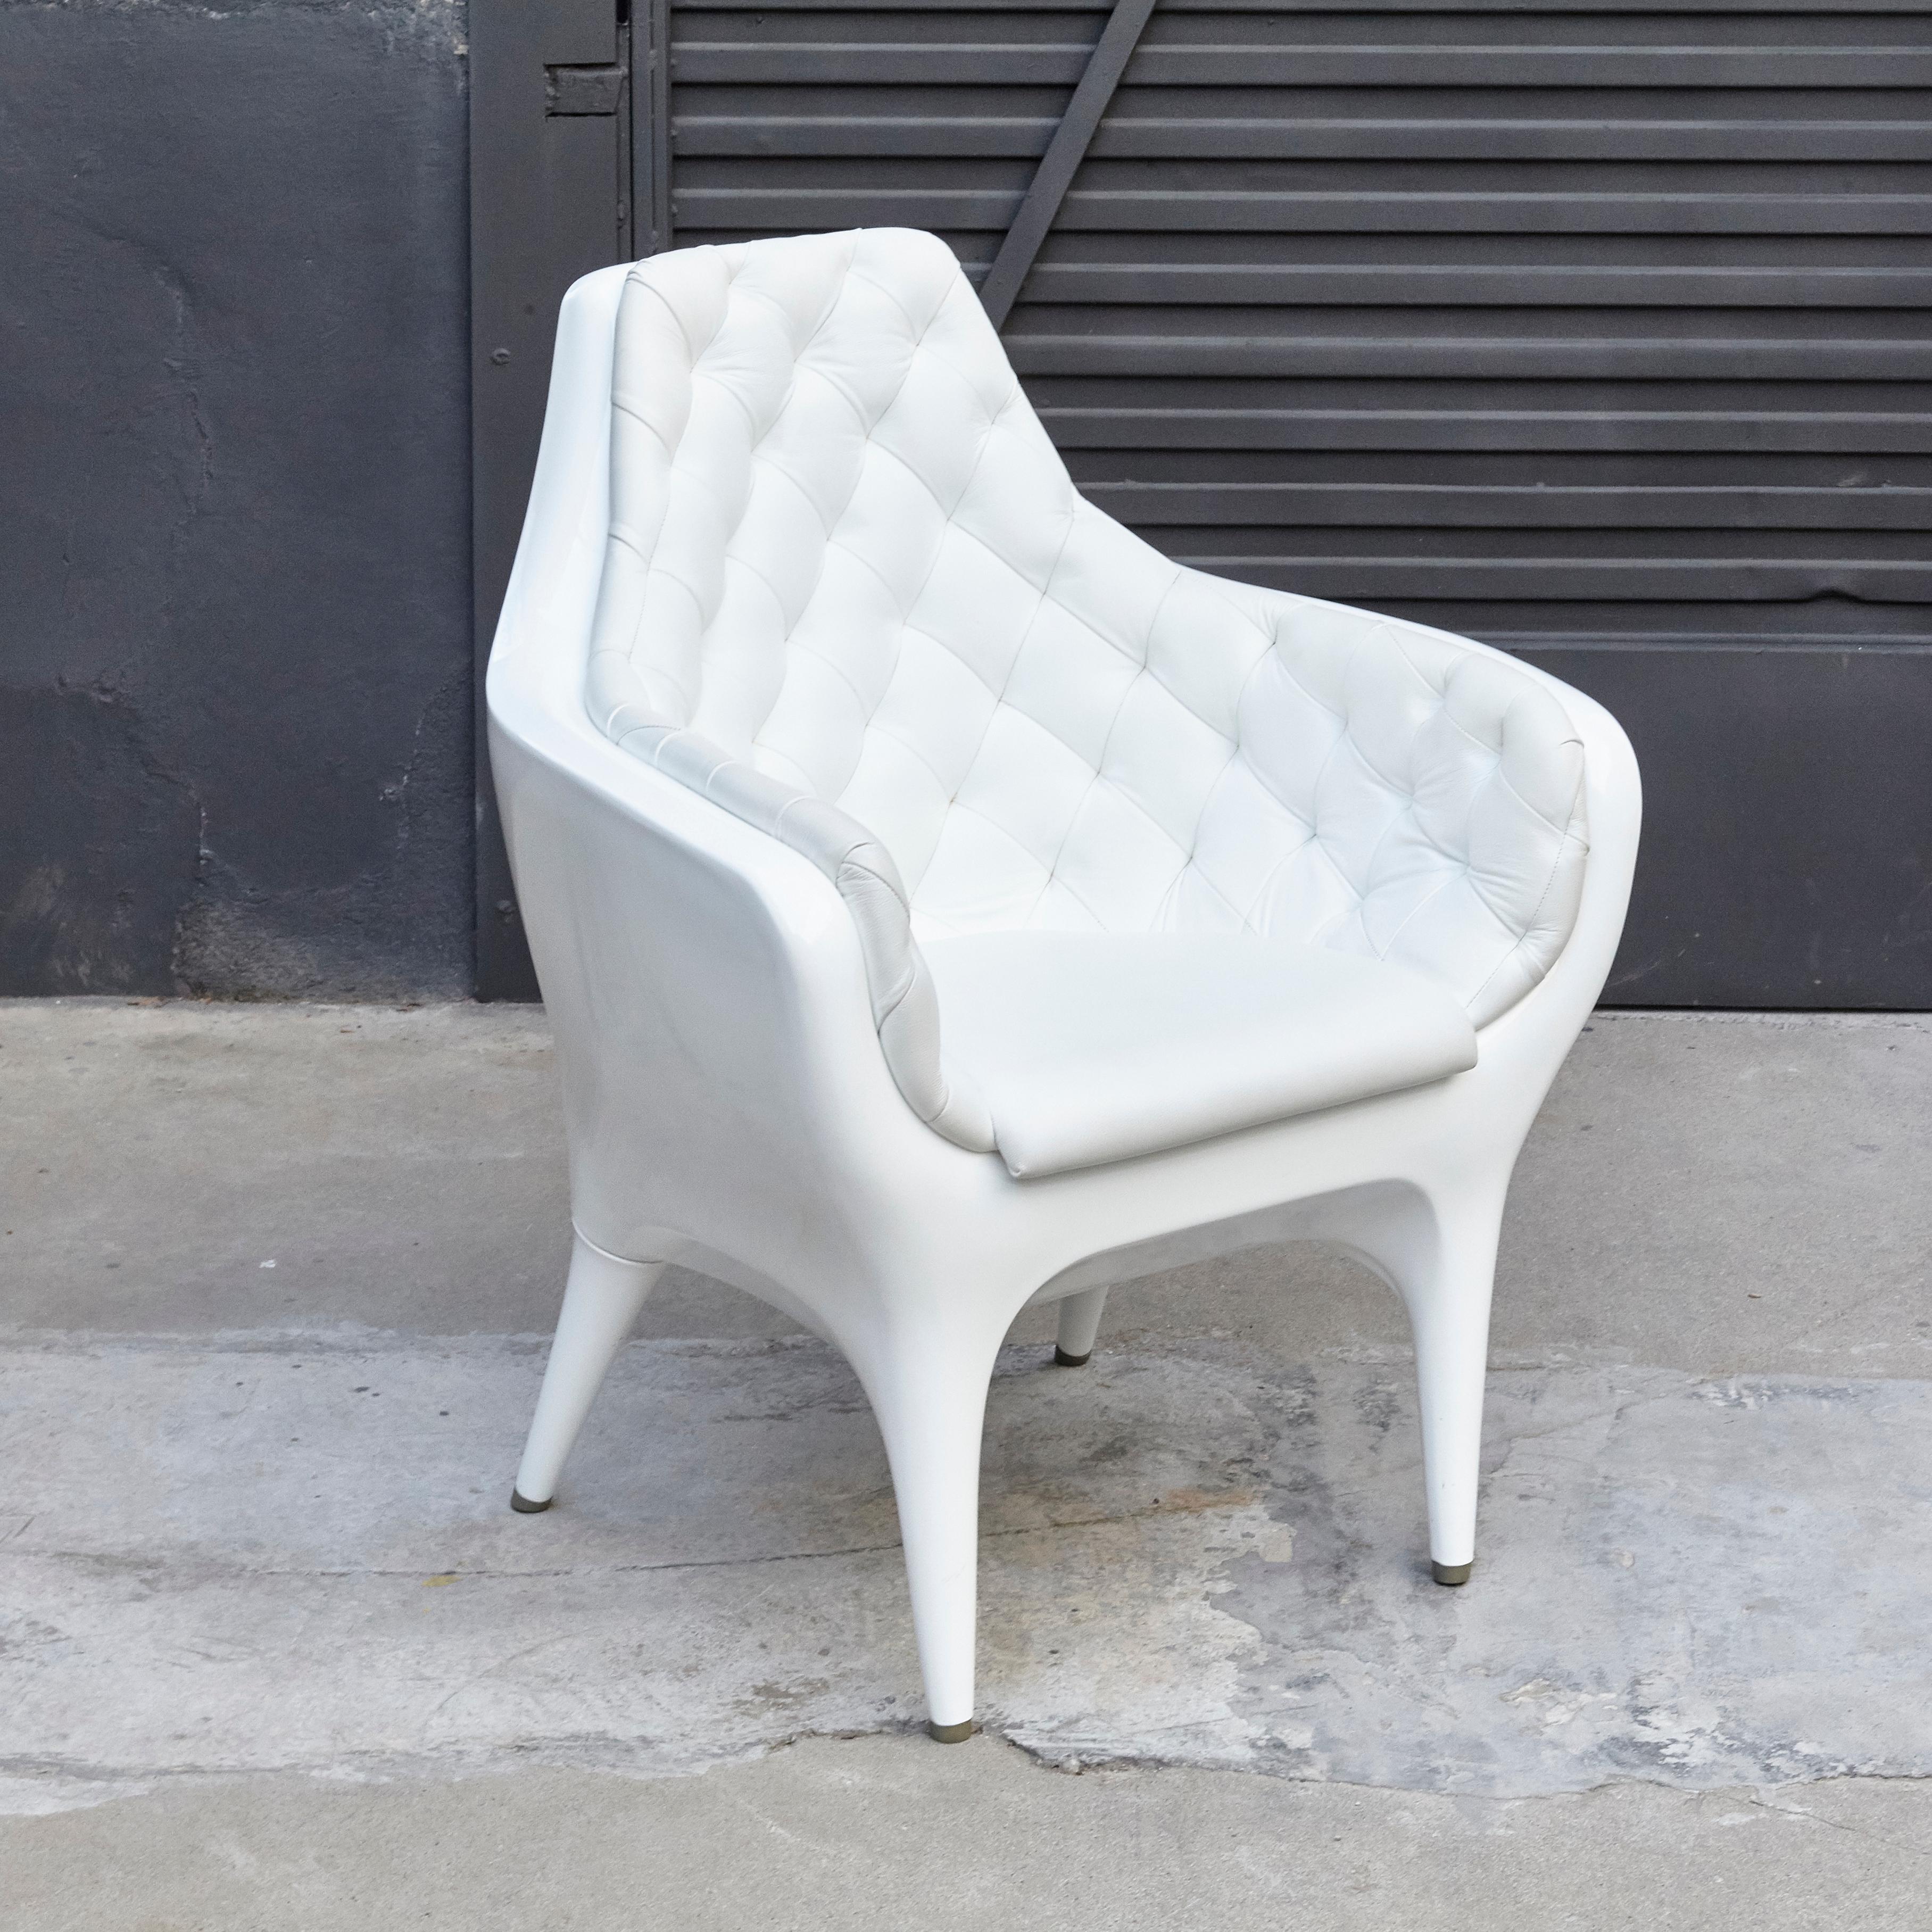 Spanish White Jaime Hayon Contemporary Showtime Armchair Lacquered For Sale